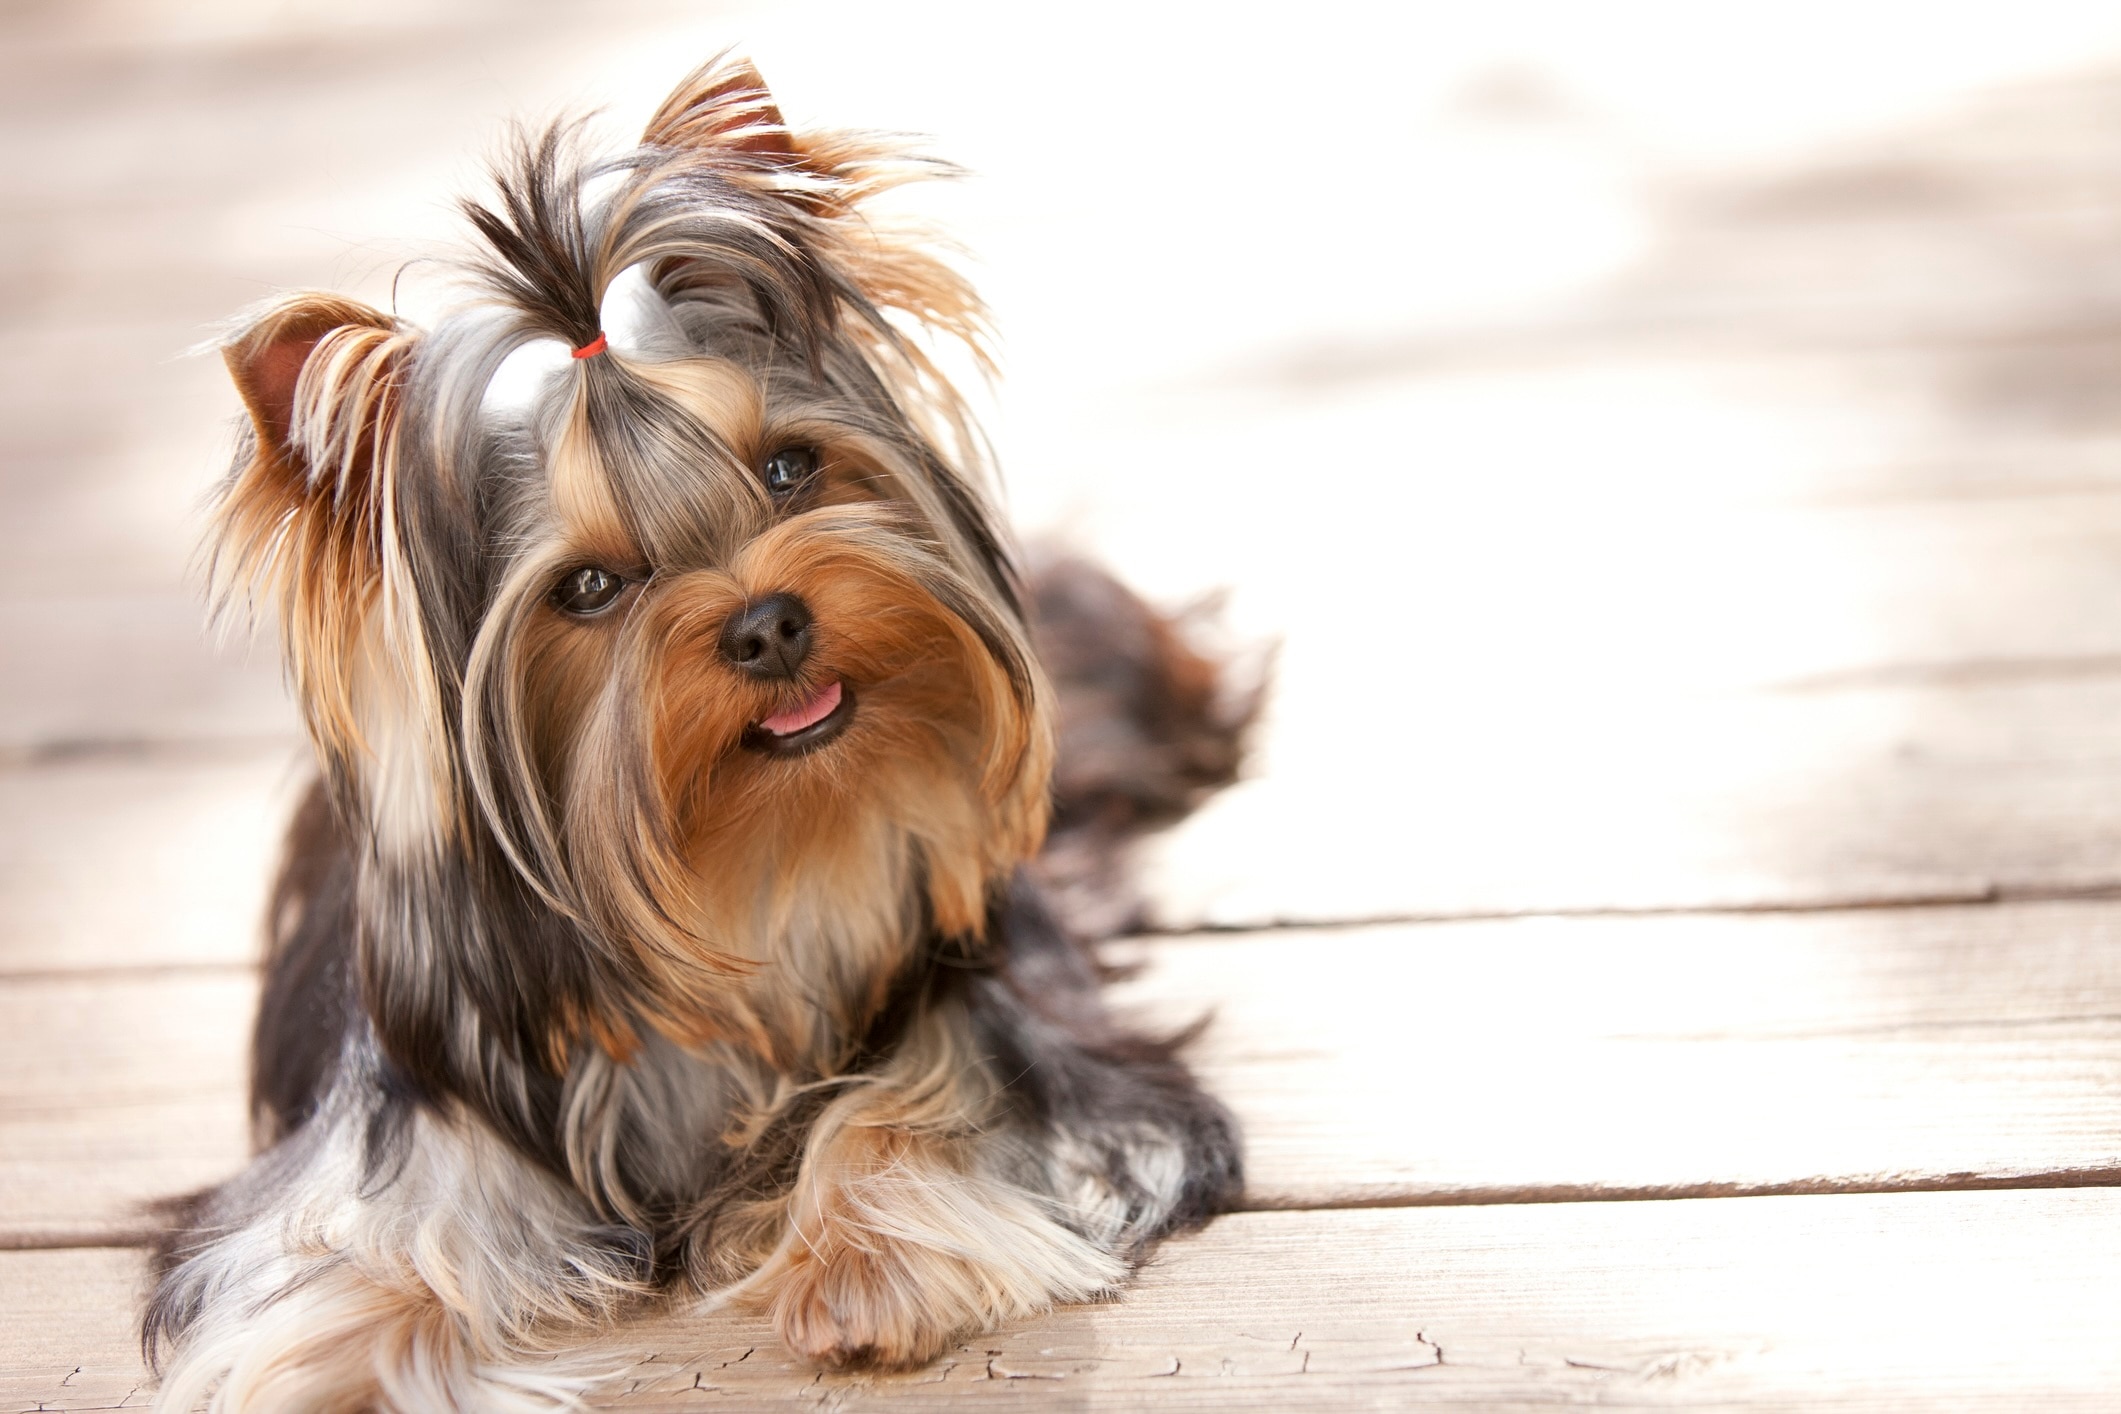 longhaired yorkie with his hair tied up lying on a deck